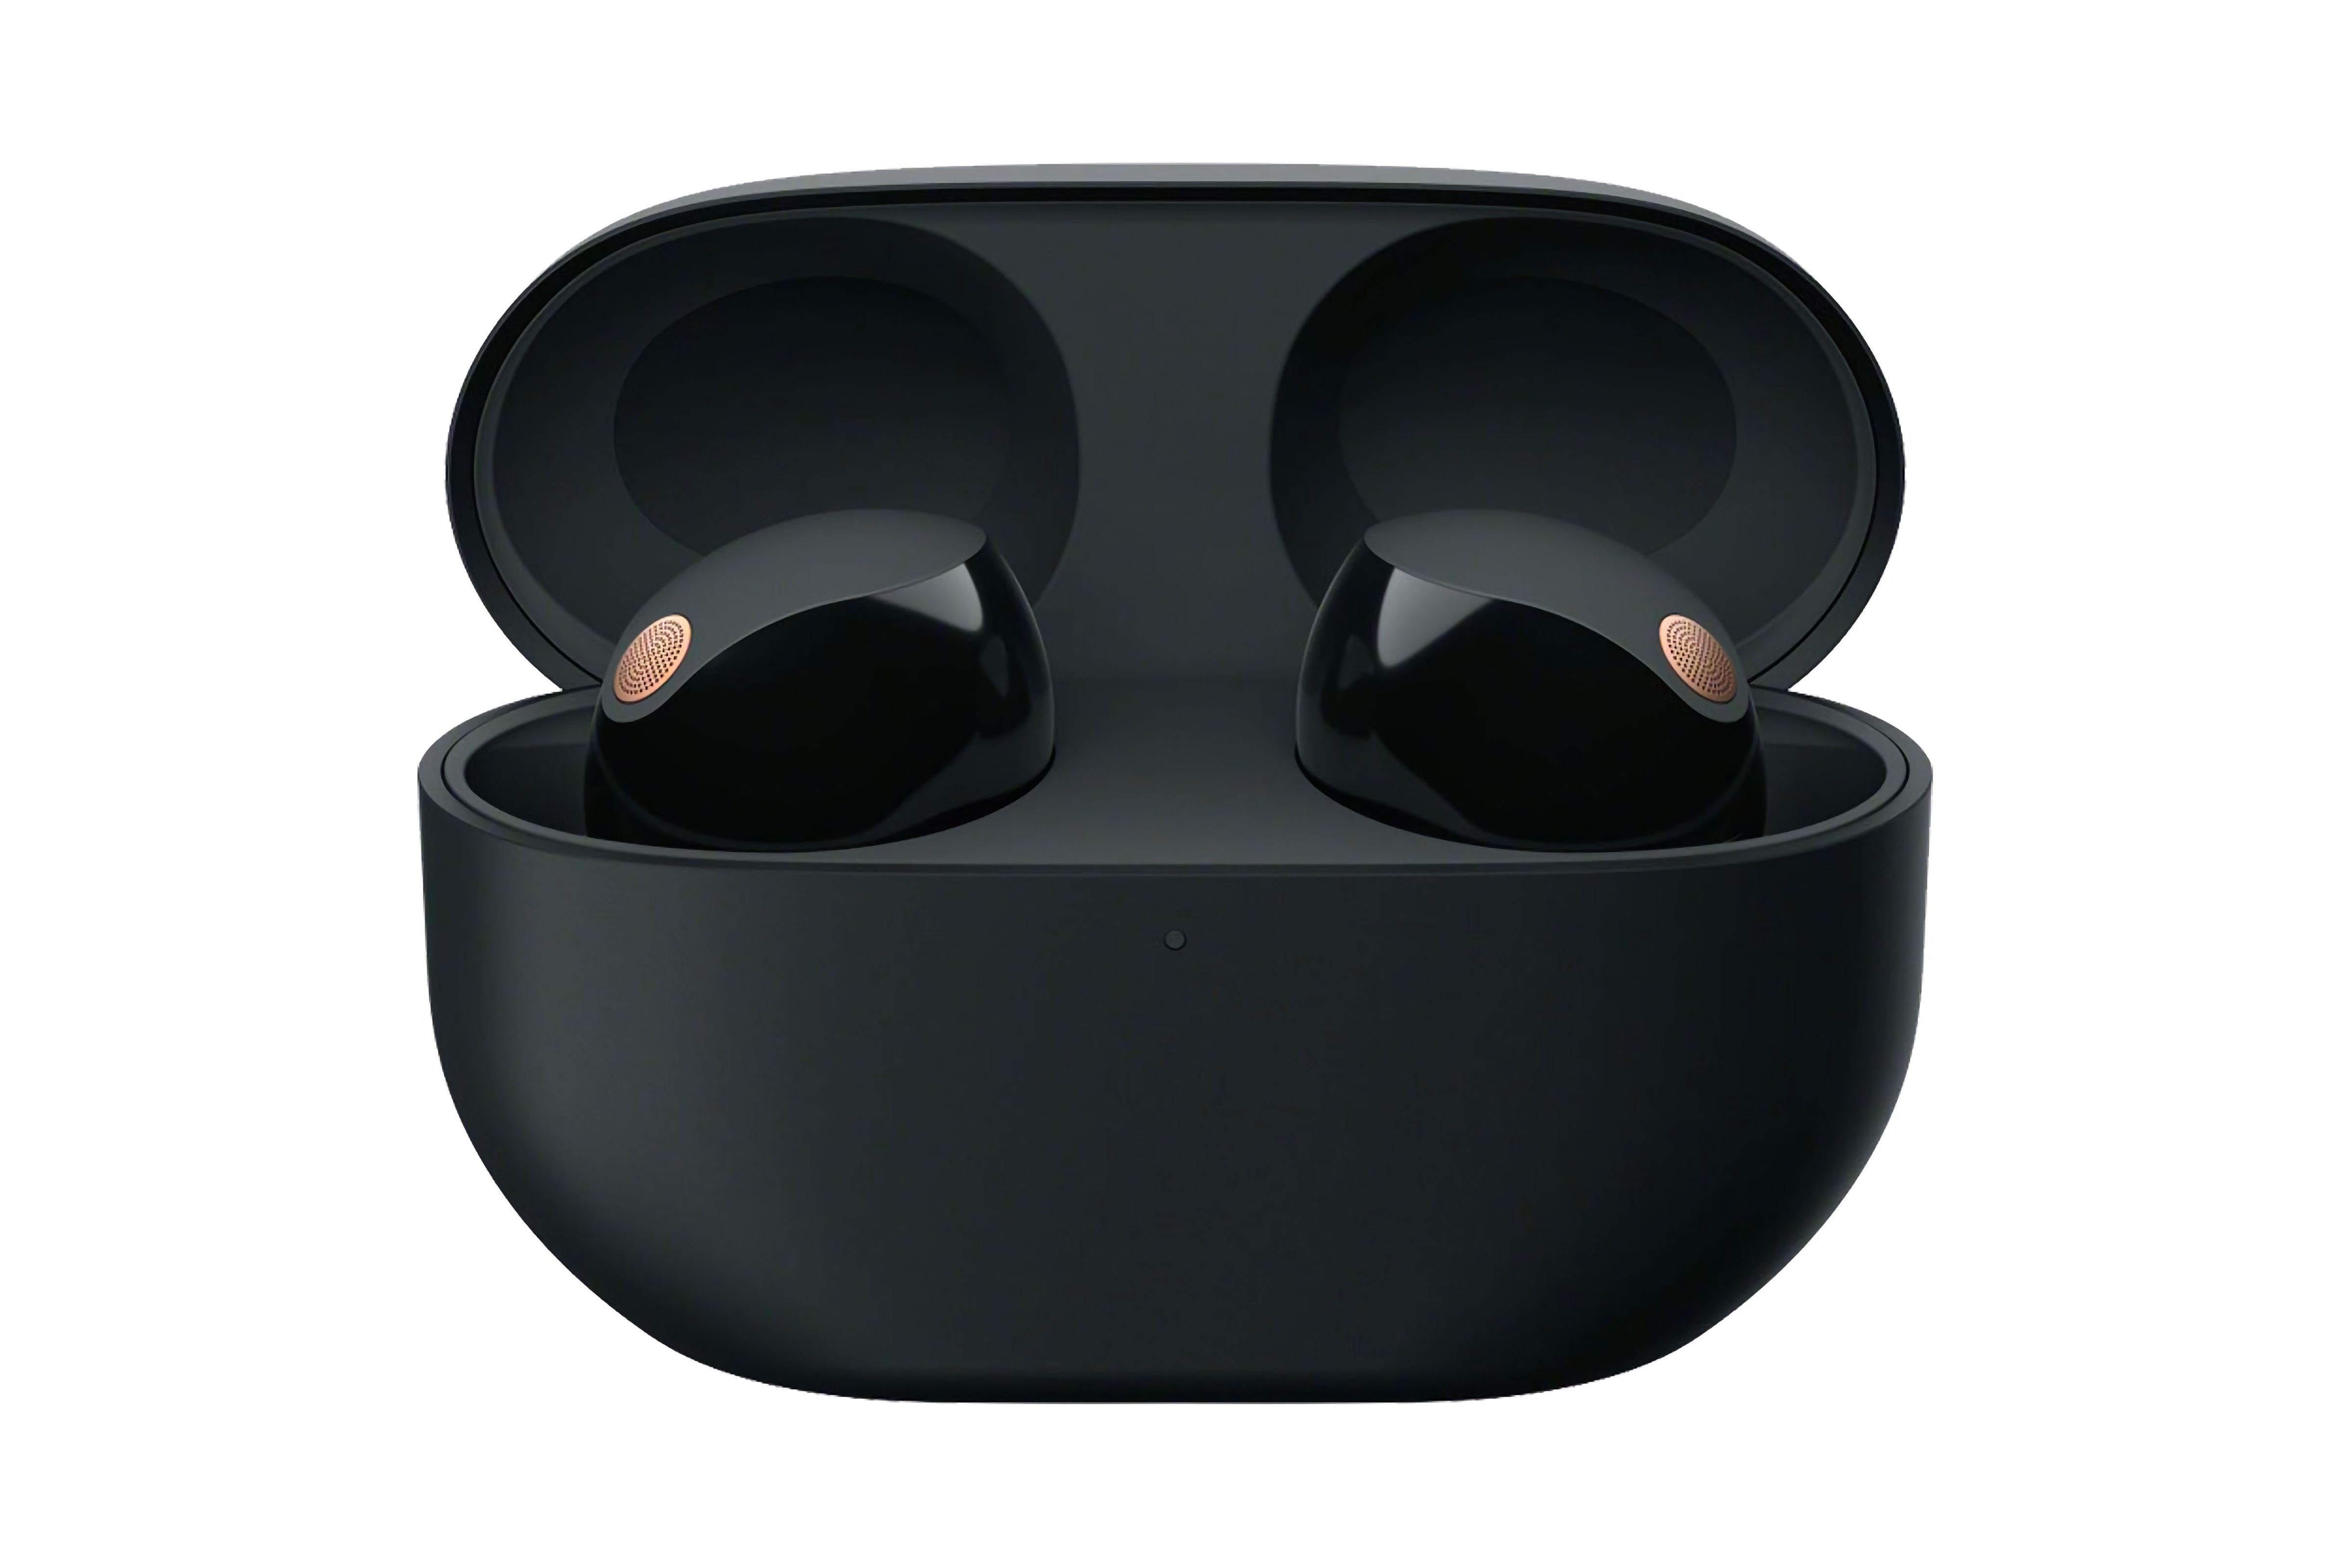 Black Sony wireless earbuds in a matching charging case.